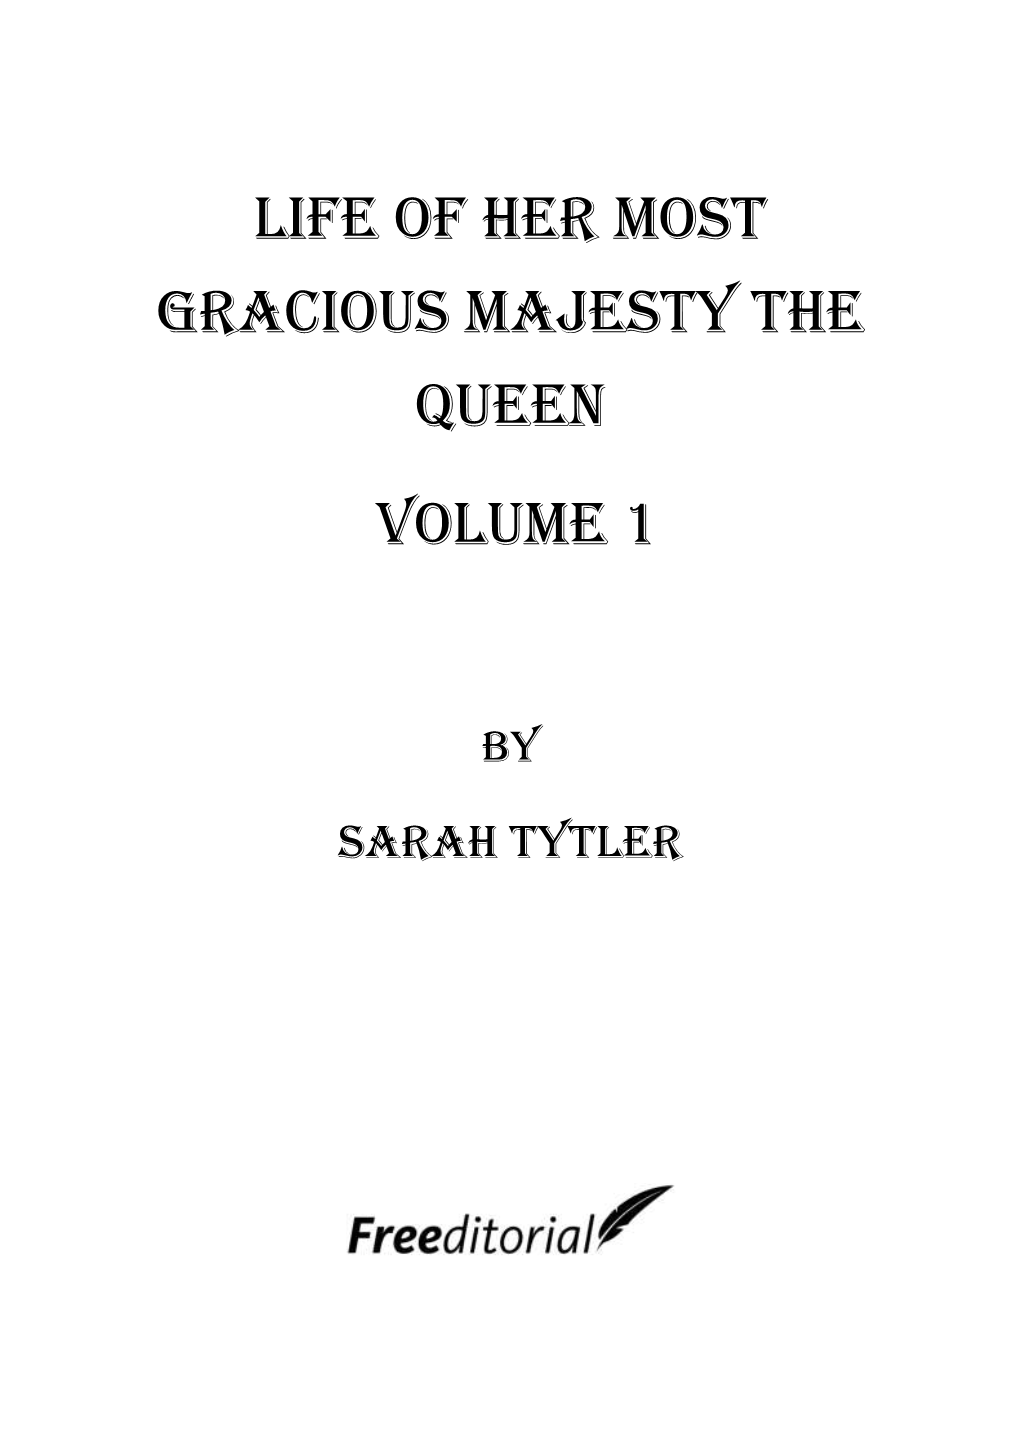 Life of Her Most Gracious Majesty the Queen Volume 1